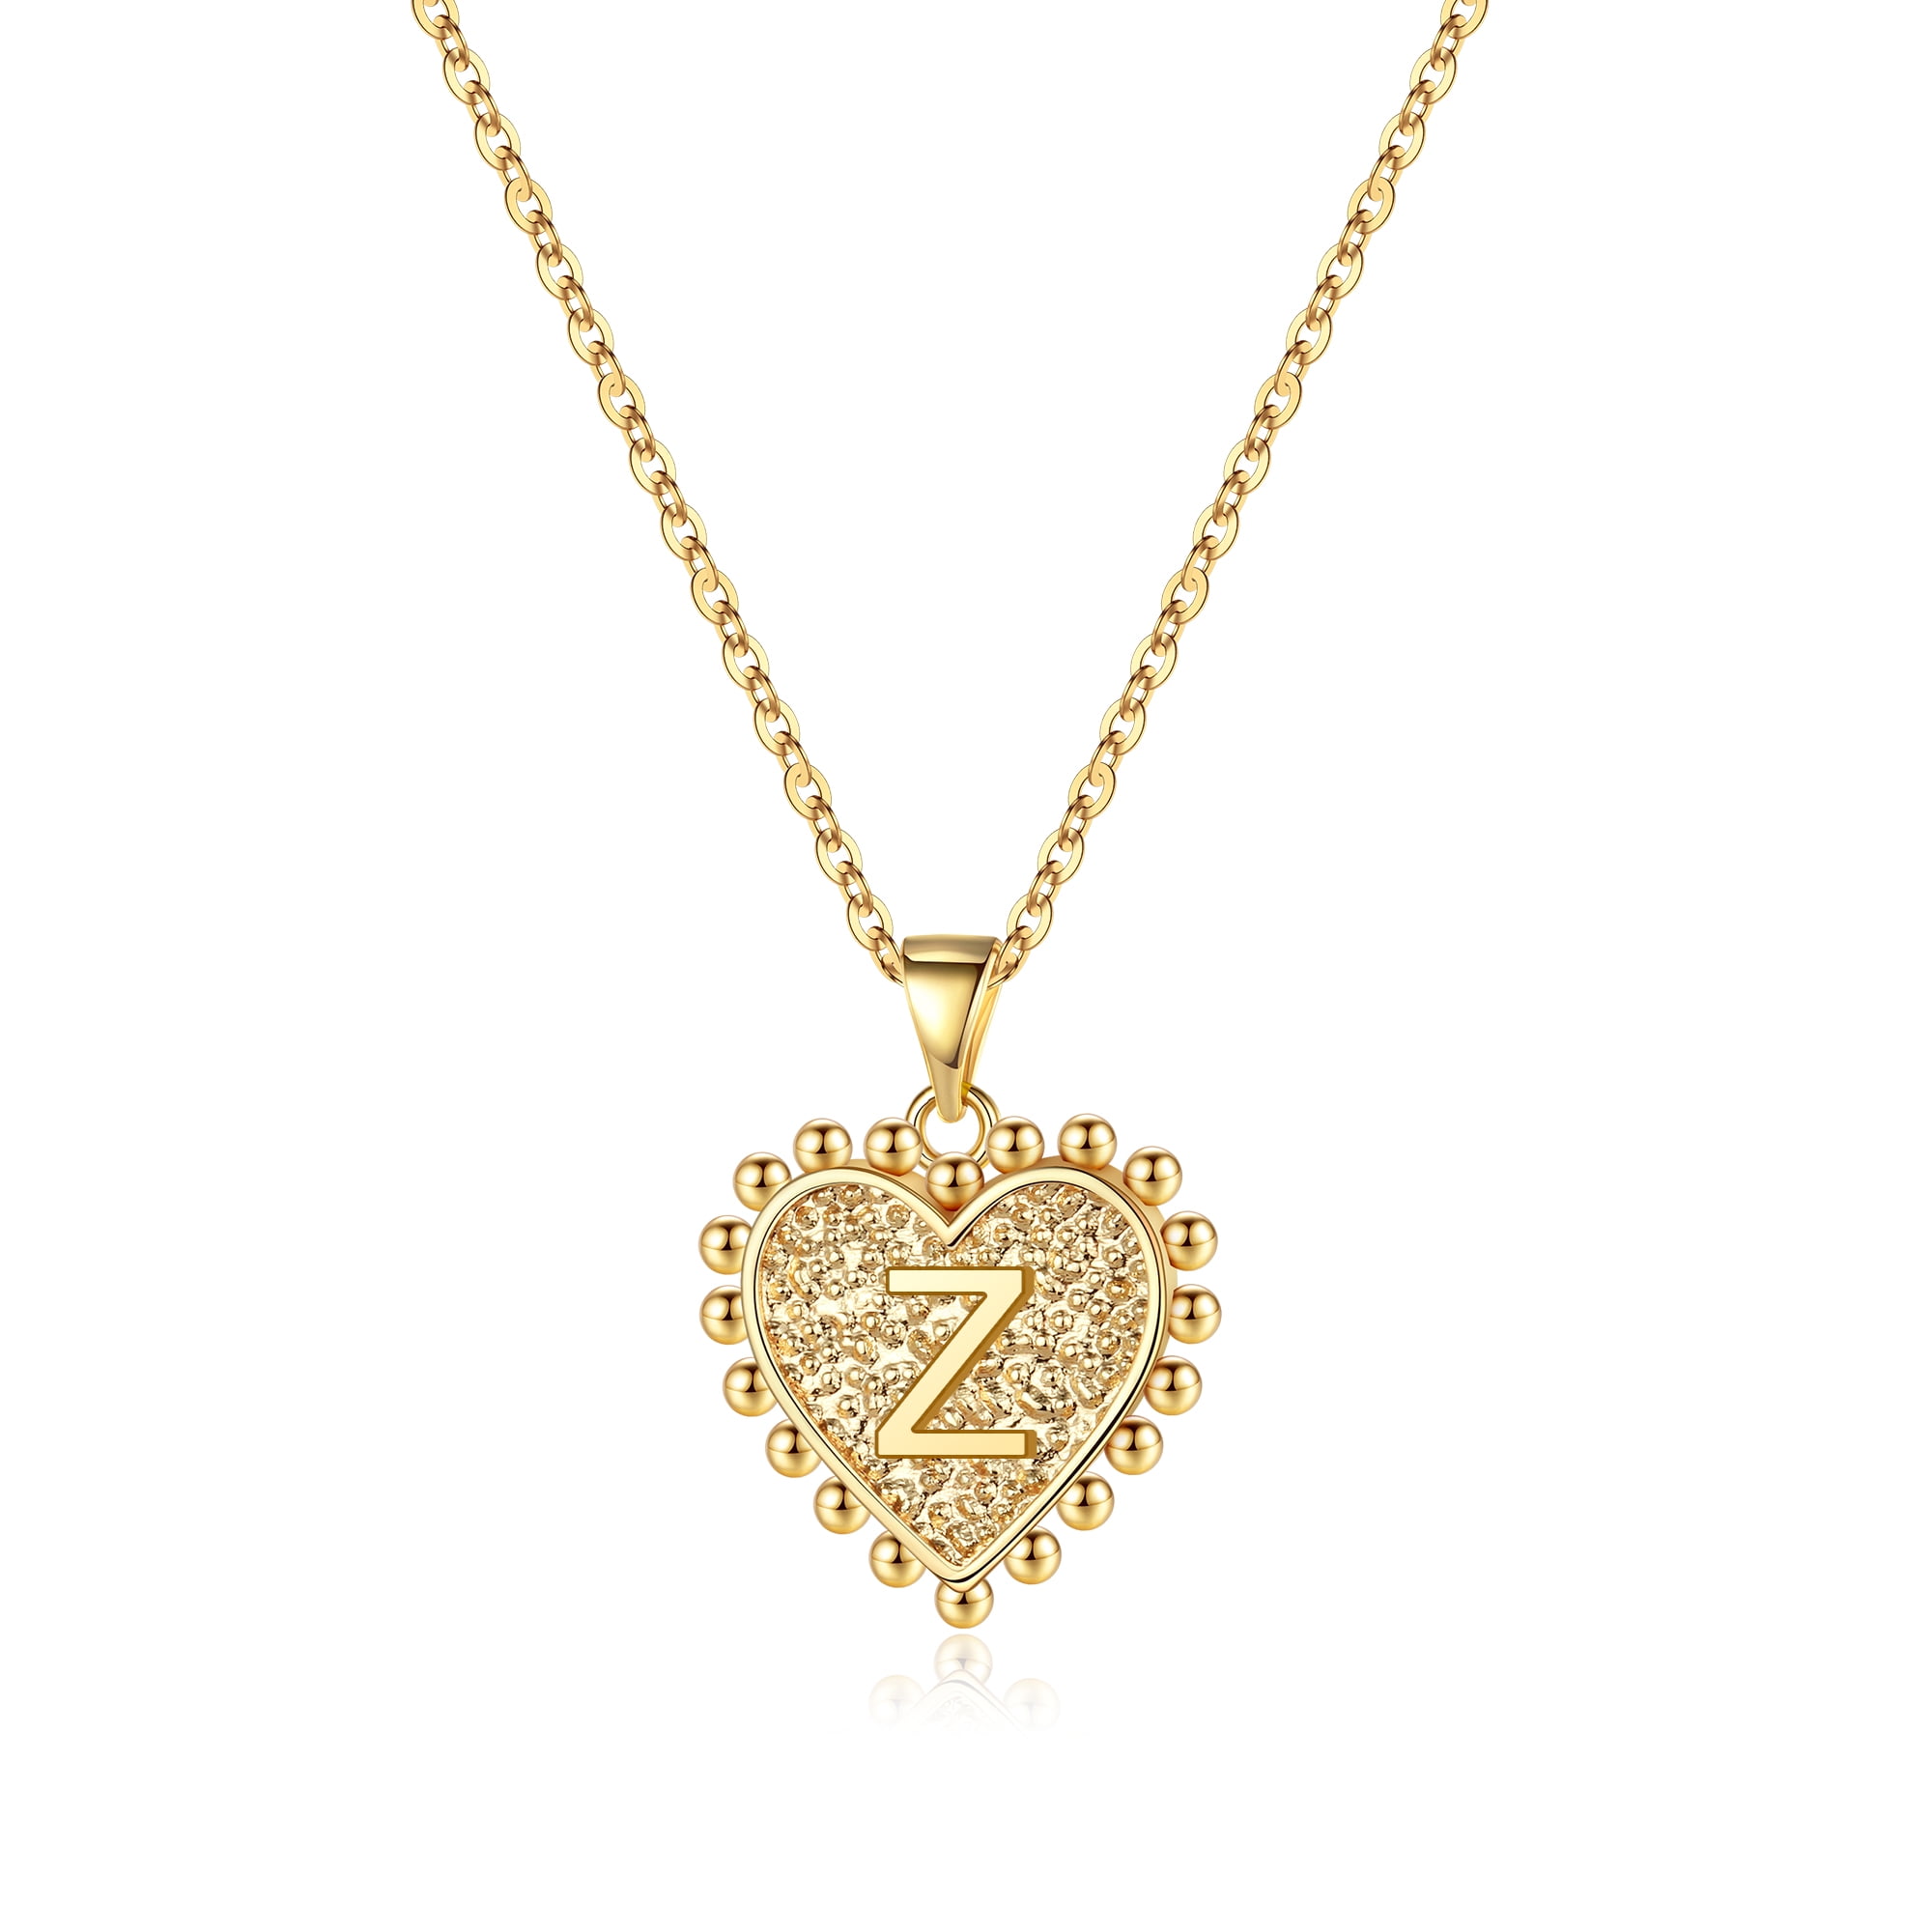 Baby infant Childrens Jewelry Girls Heart Frame Pendant 14K Yellow Gold Filled